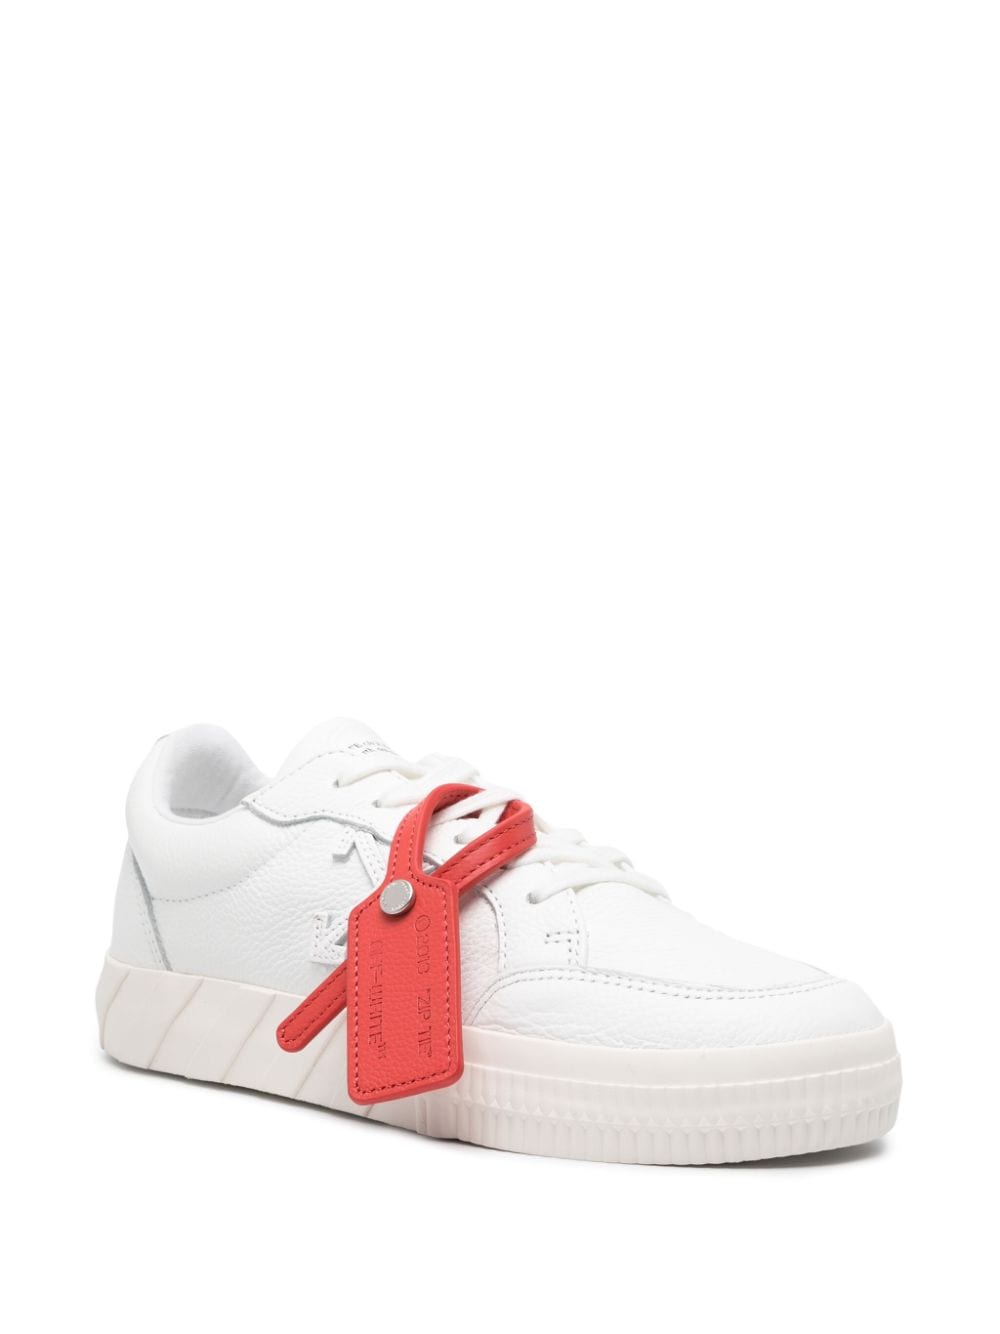 Off-White Low Vulcanized Leather Sneakers - Farfetch